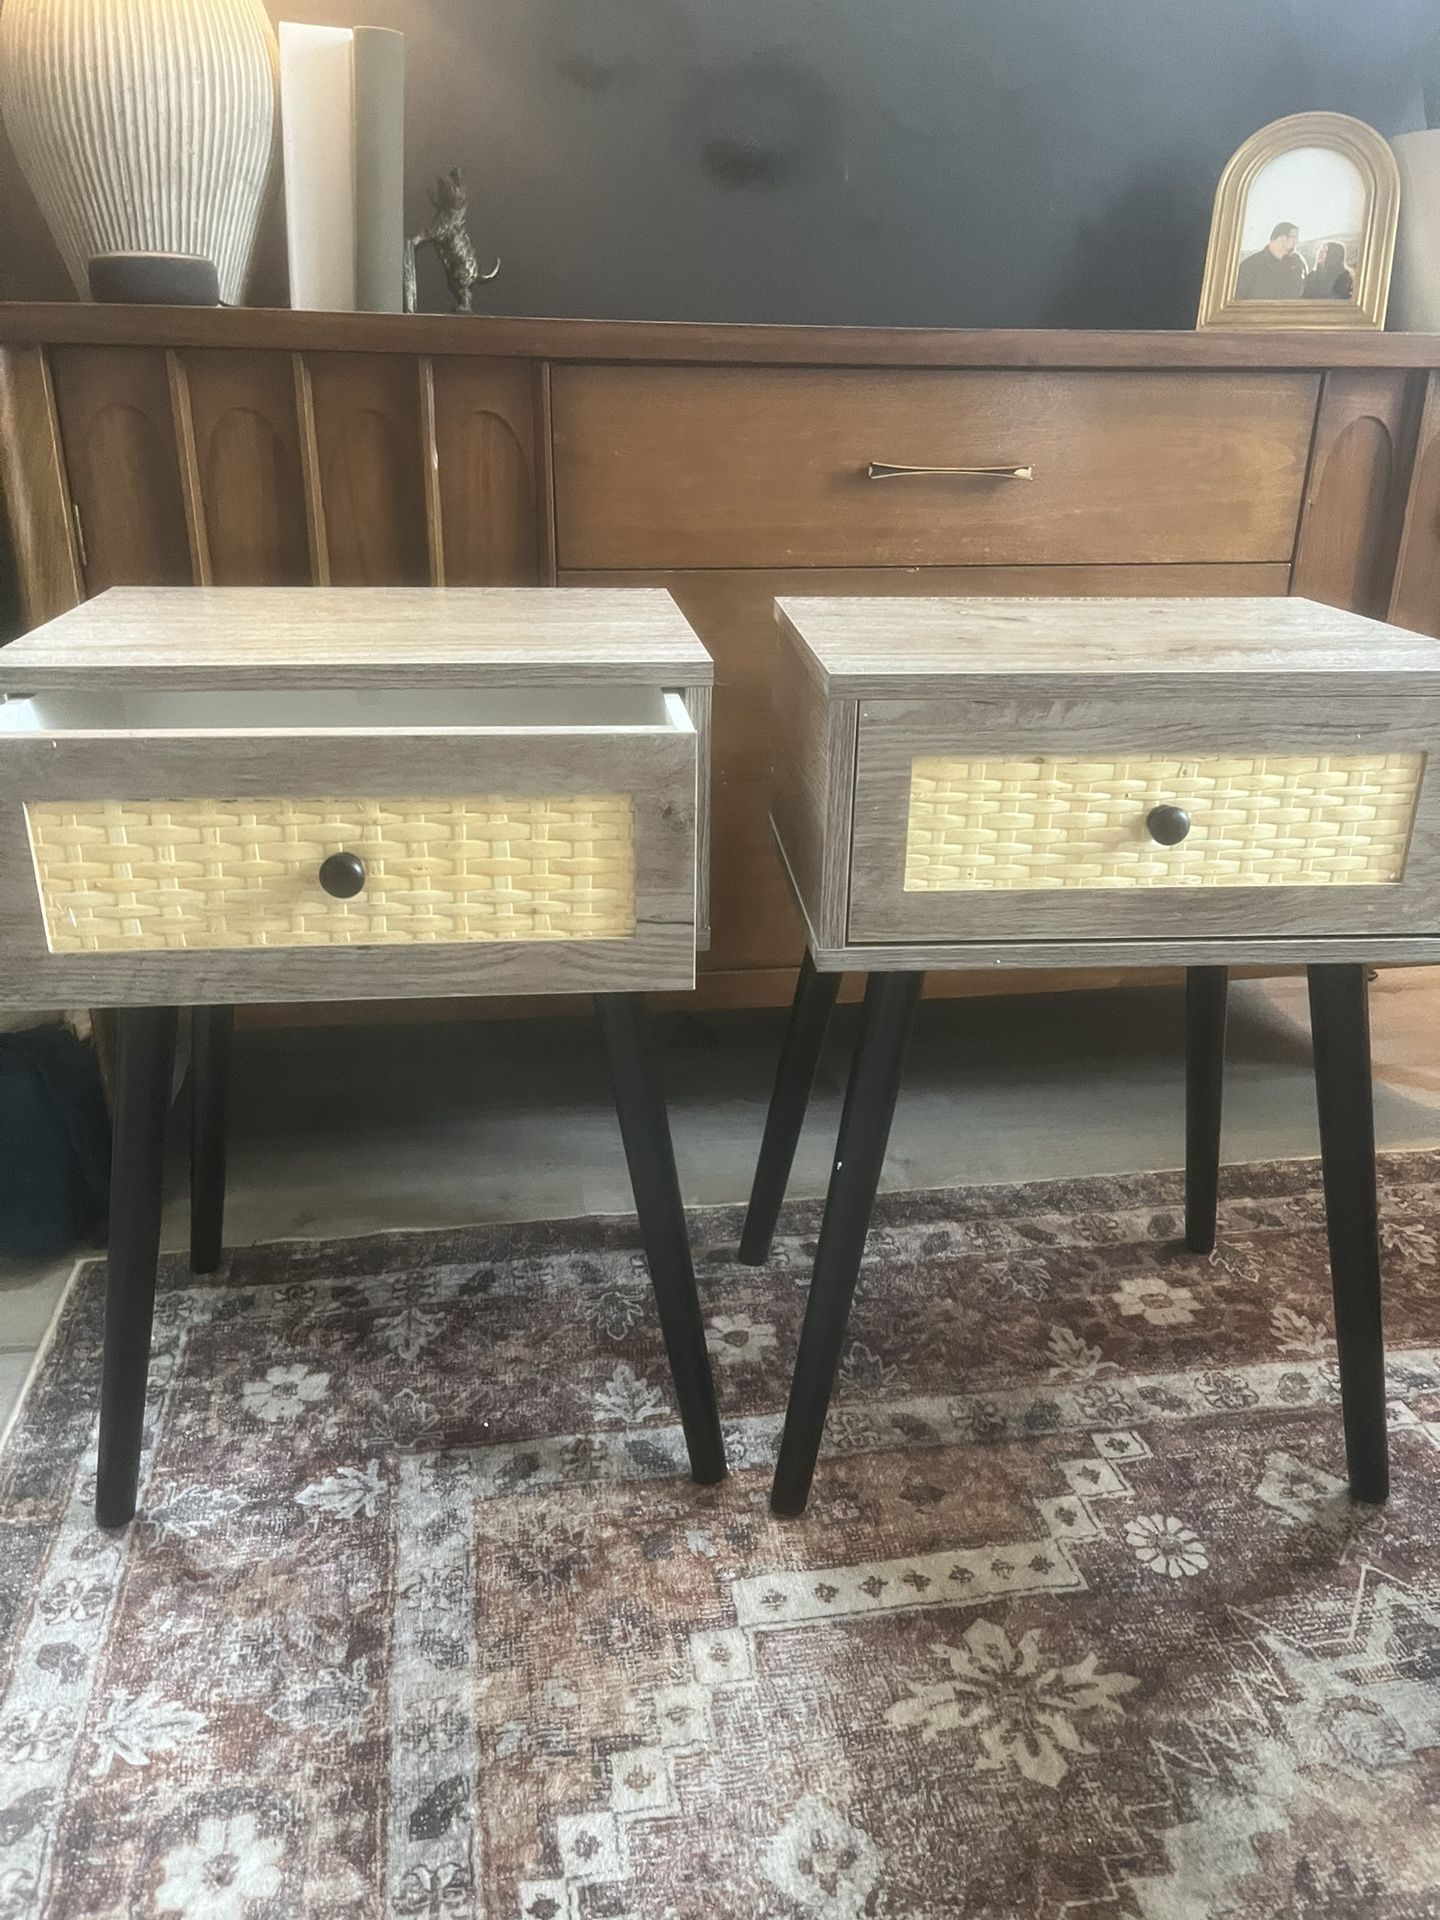 End Tables/ Night Stands 